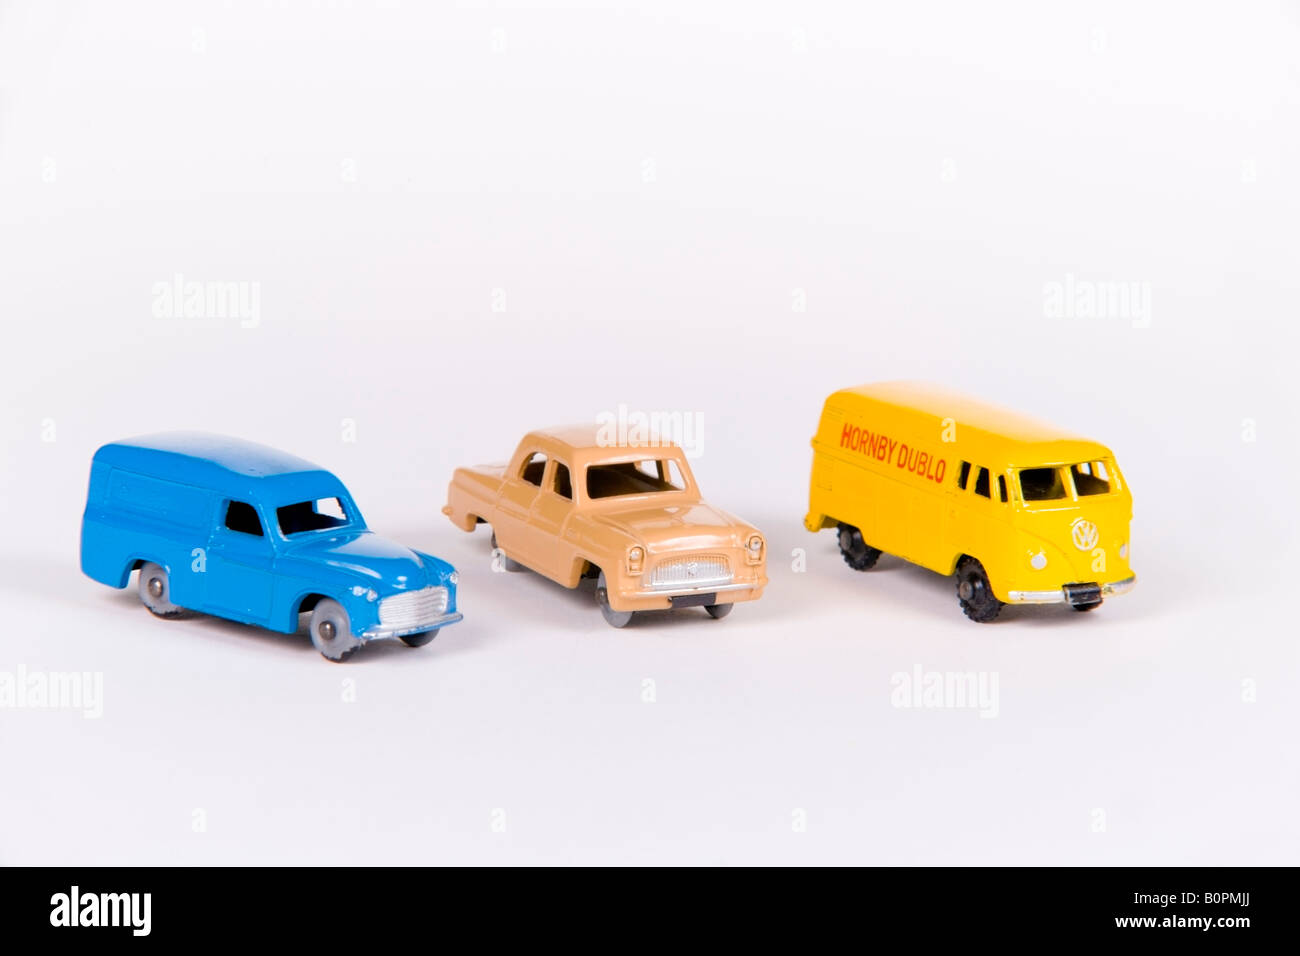 Group of Hornby Dublo 1960 s toy cars Stock Photo